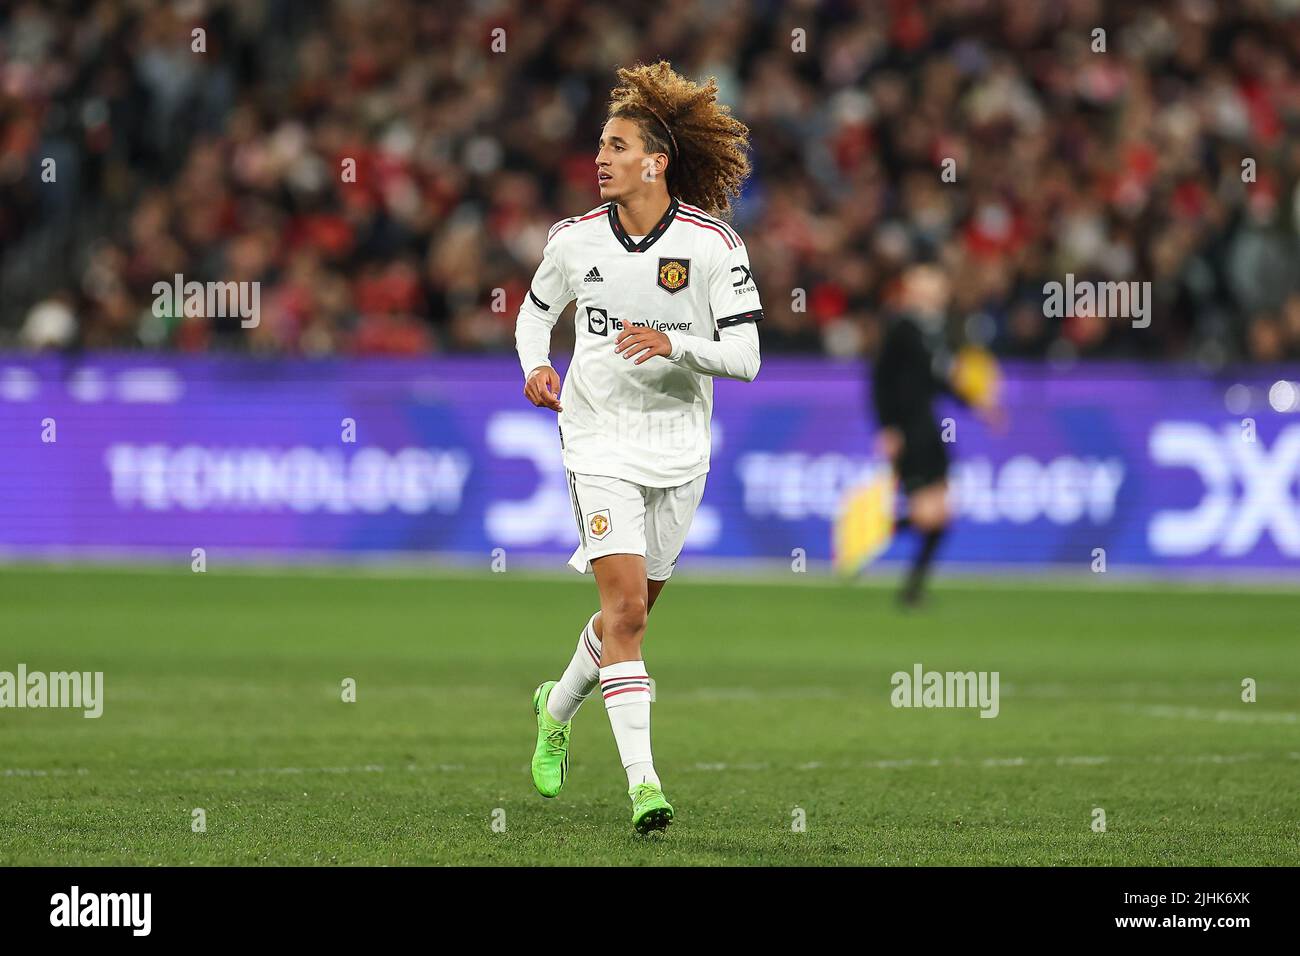 Hannibal Mejbri (46) of Manchester United in action during the game in ,  on 7/19/2022. (Photo by Patrick Hoelscher/News Images/Sipa USA) Stock Photo